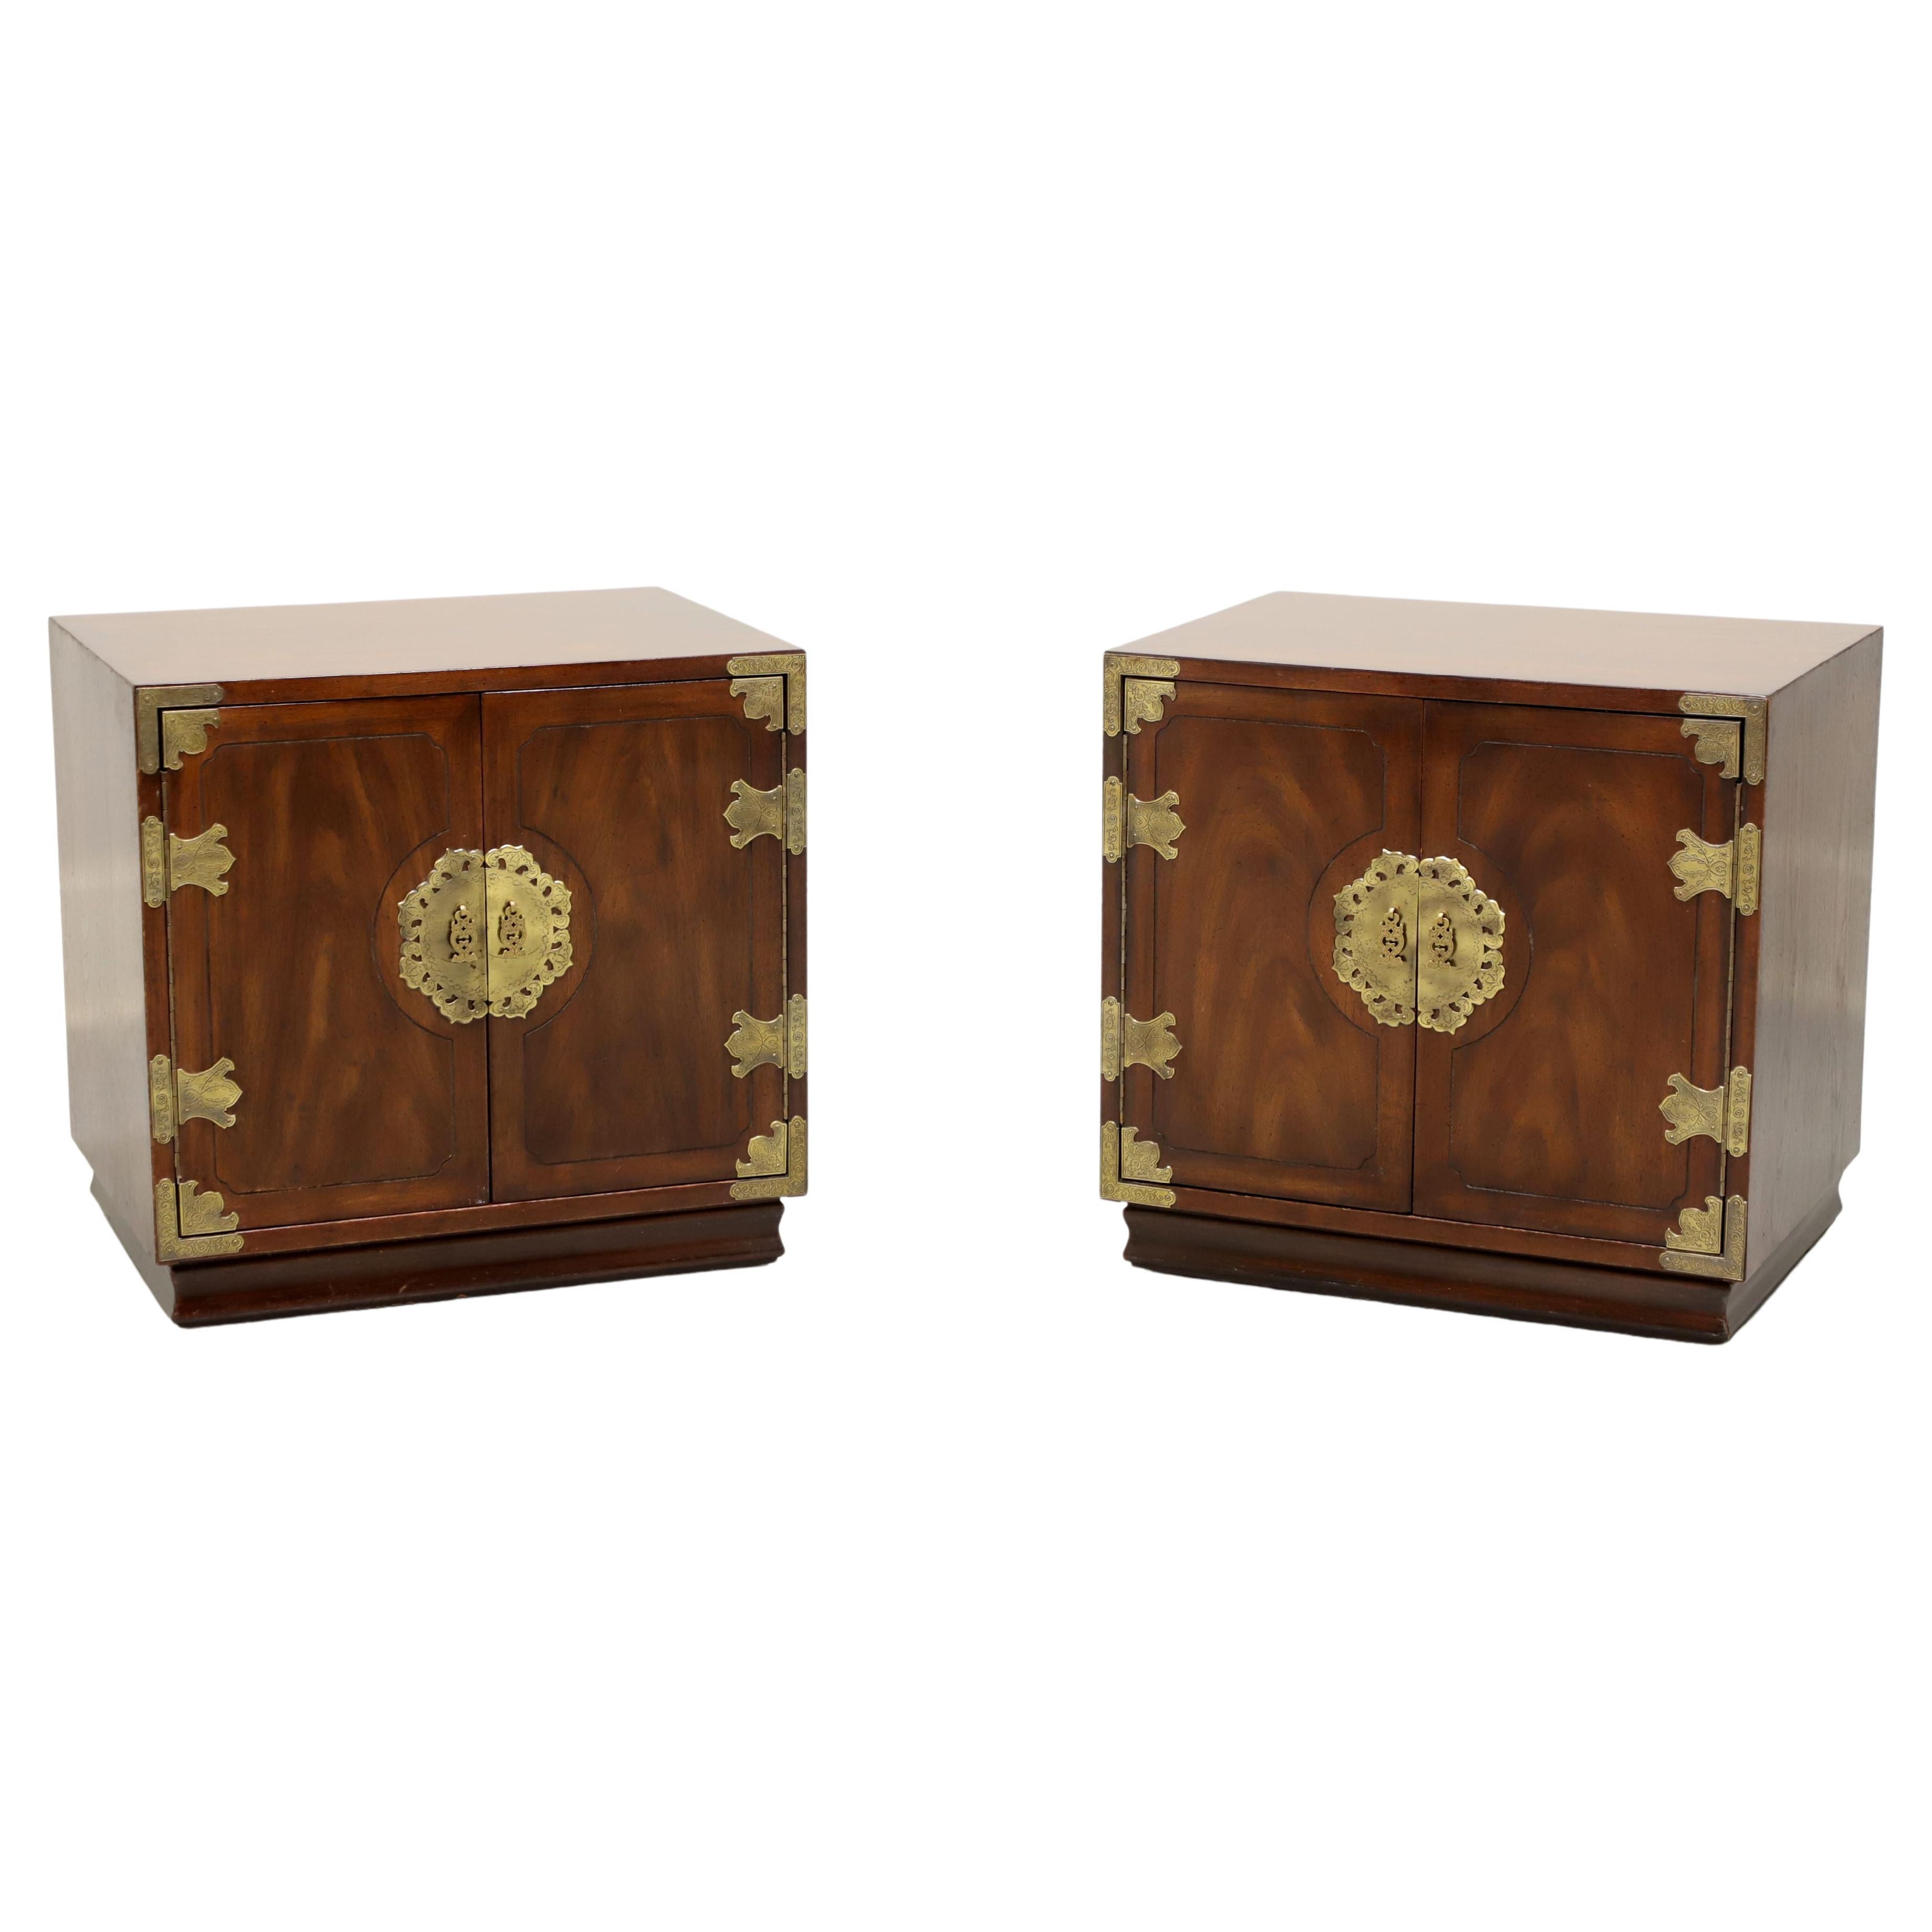 HENREDON Asian Japanese Tansu Campaign Bedside Cabinets / Nightstands - Pair